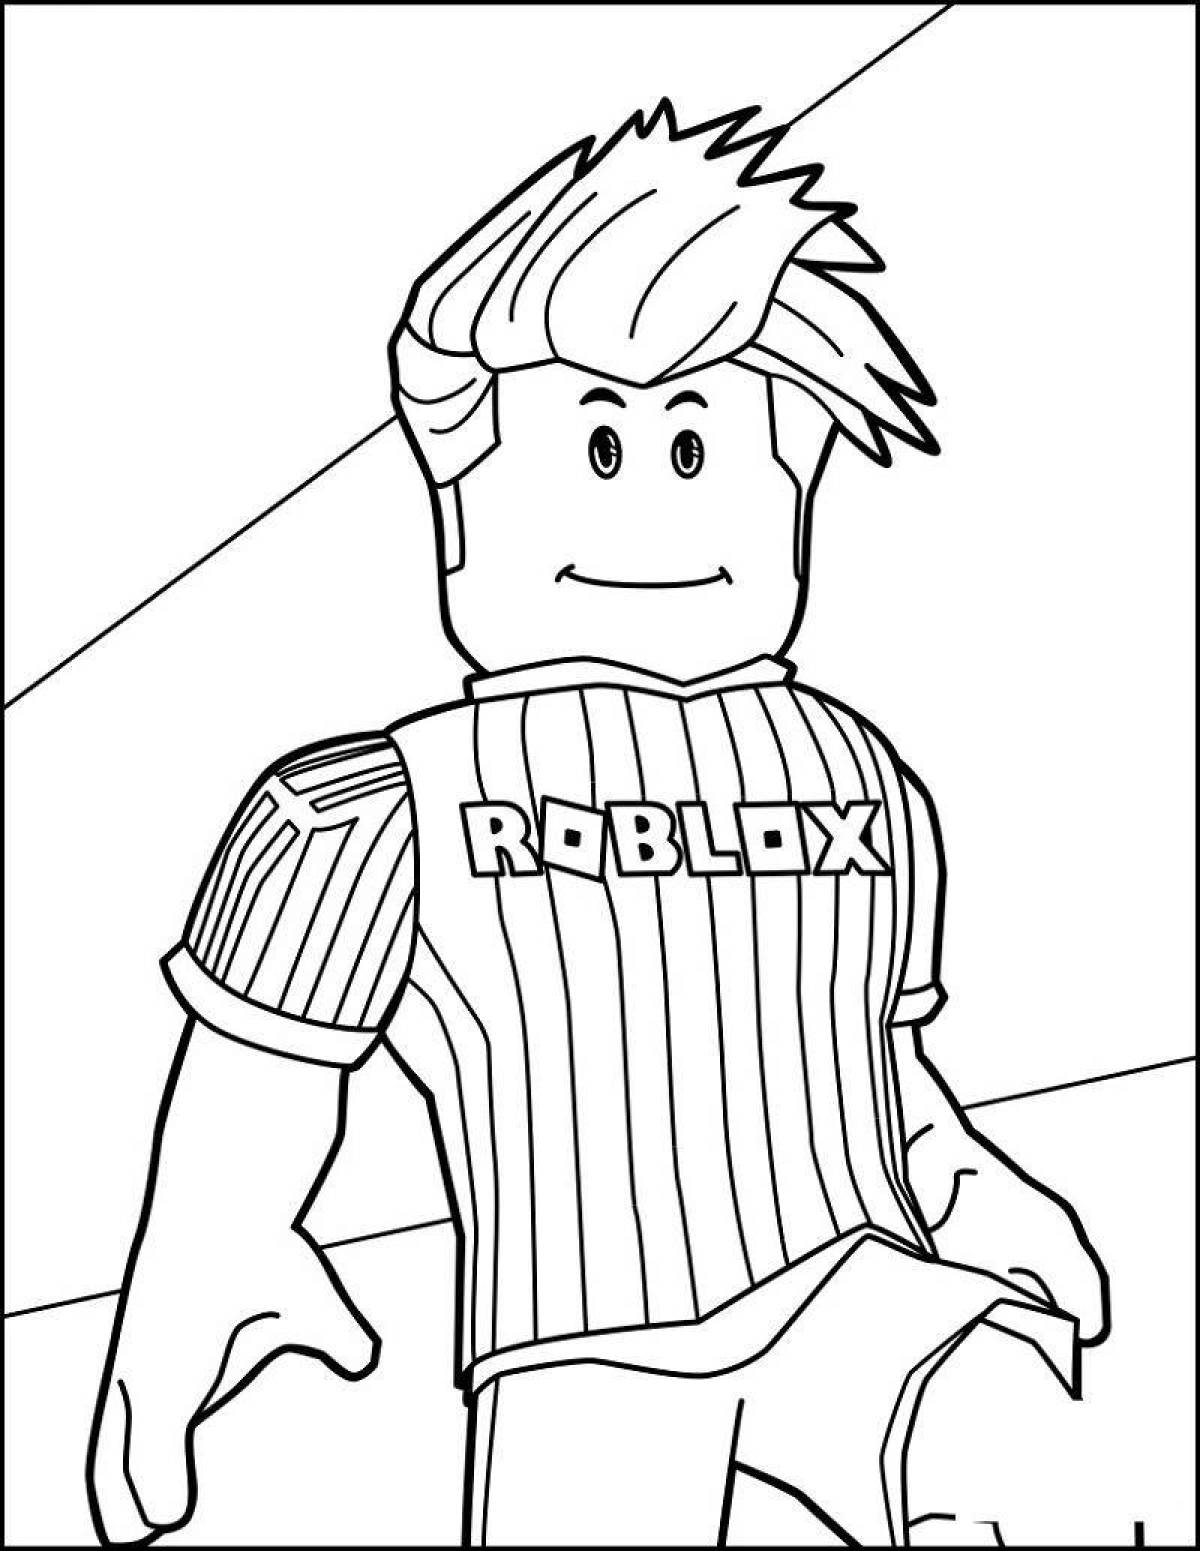 Amazing roblox ler4eg coloring page